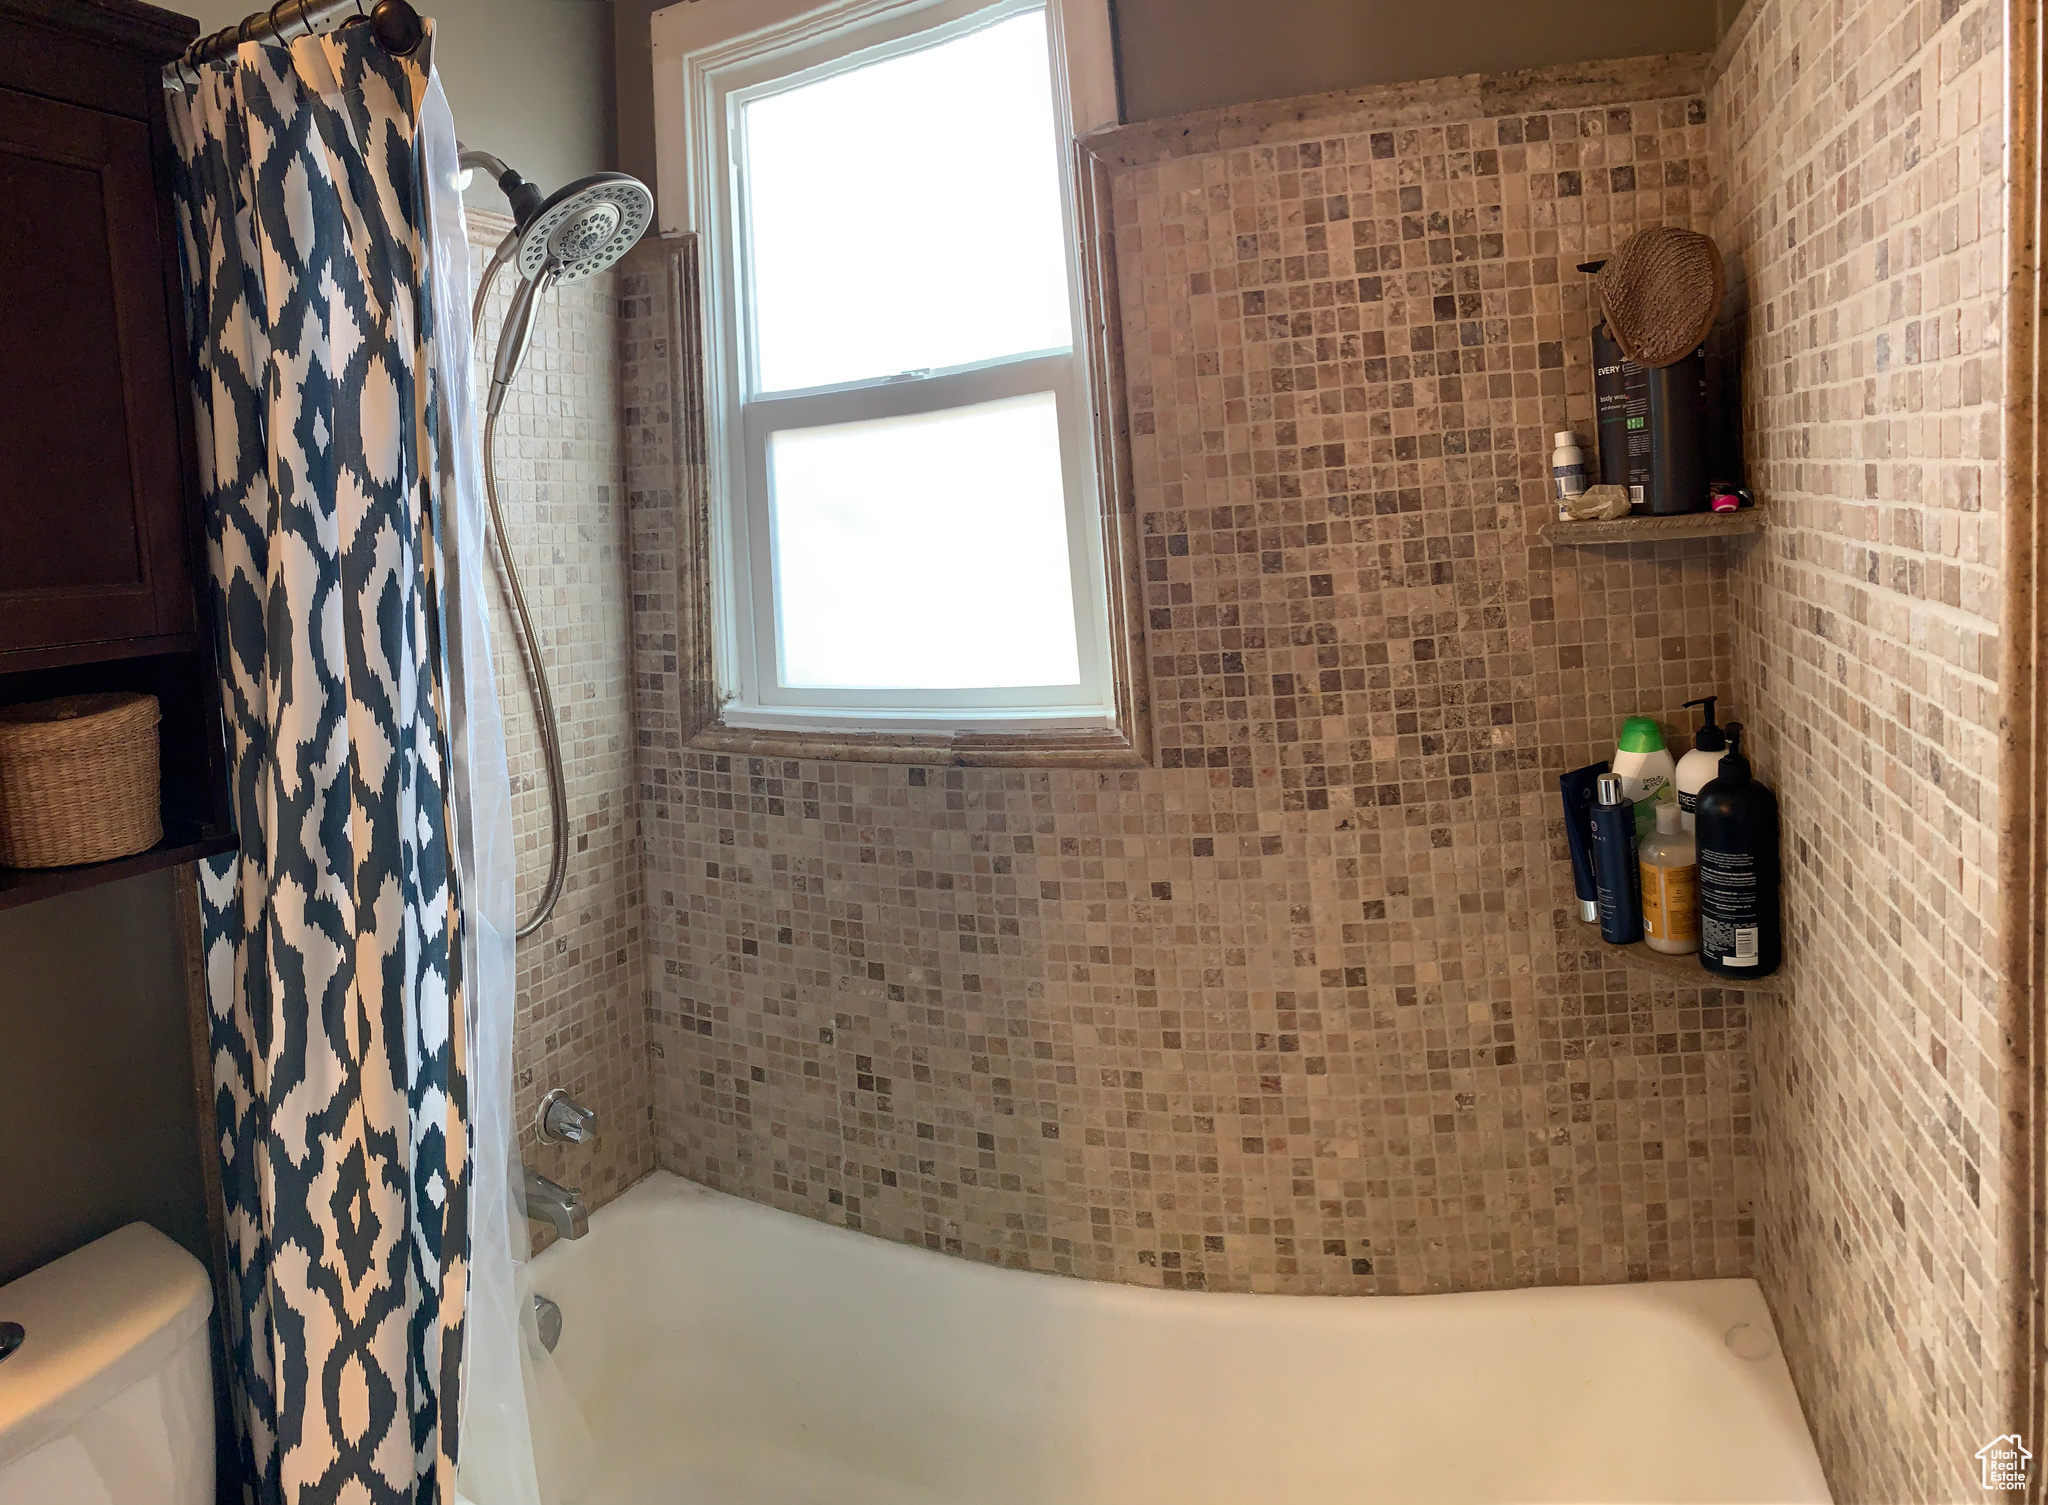 Bathroom featuring plenty of natural light, shower / tub combo, and toilet